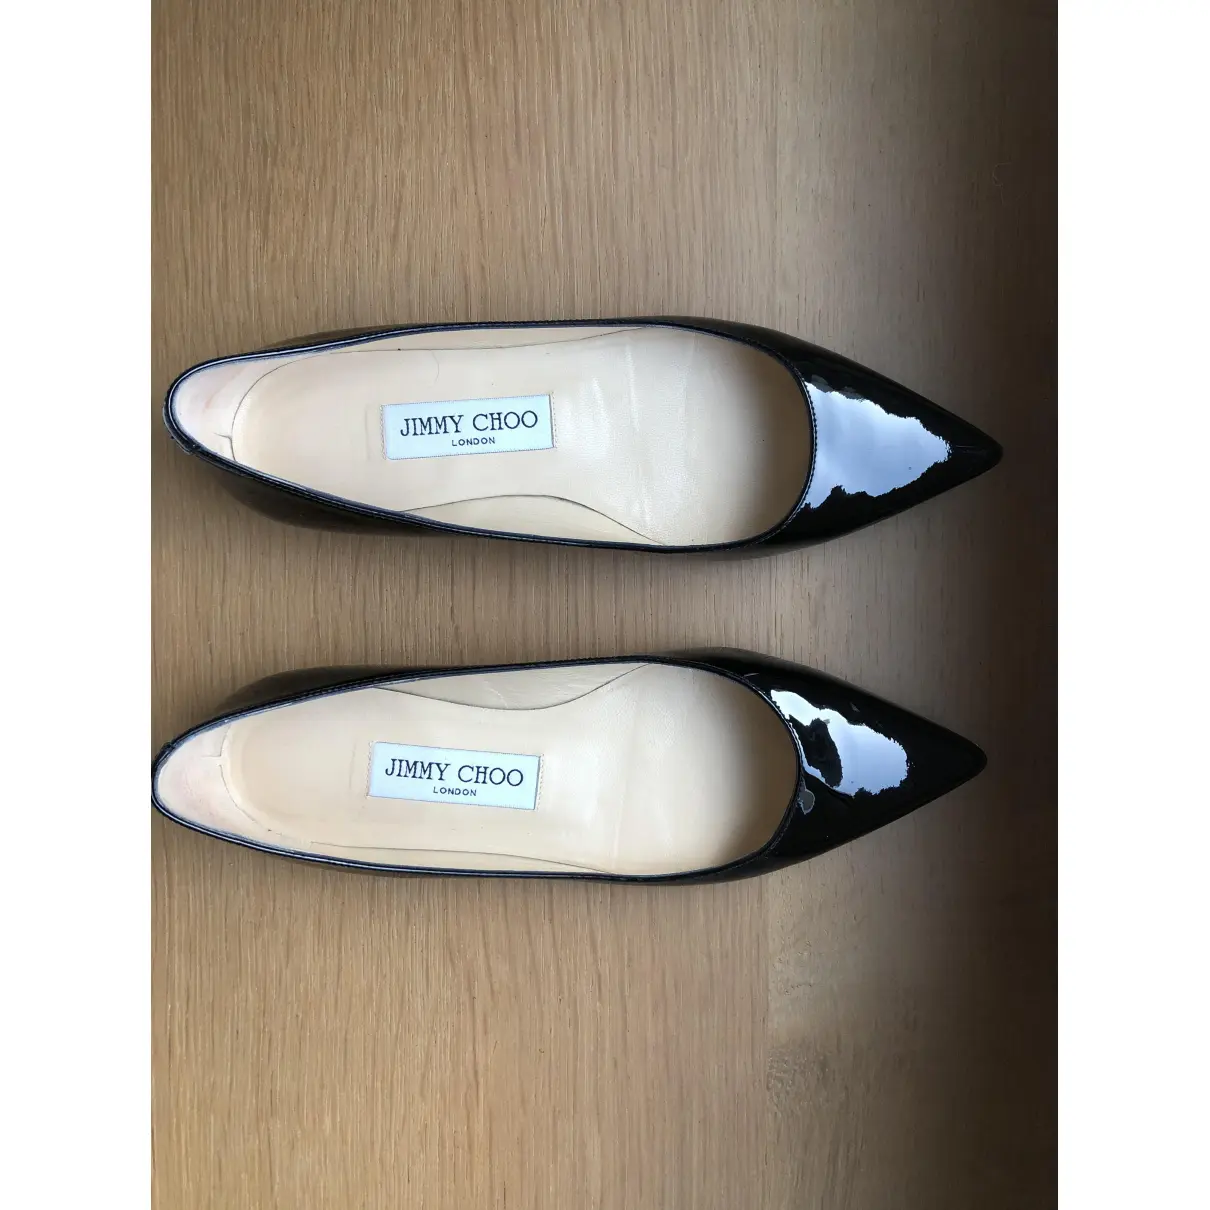 Buy Jimmy Choo Patent leather ballet flats online